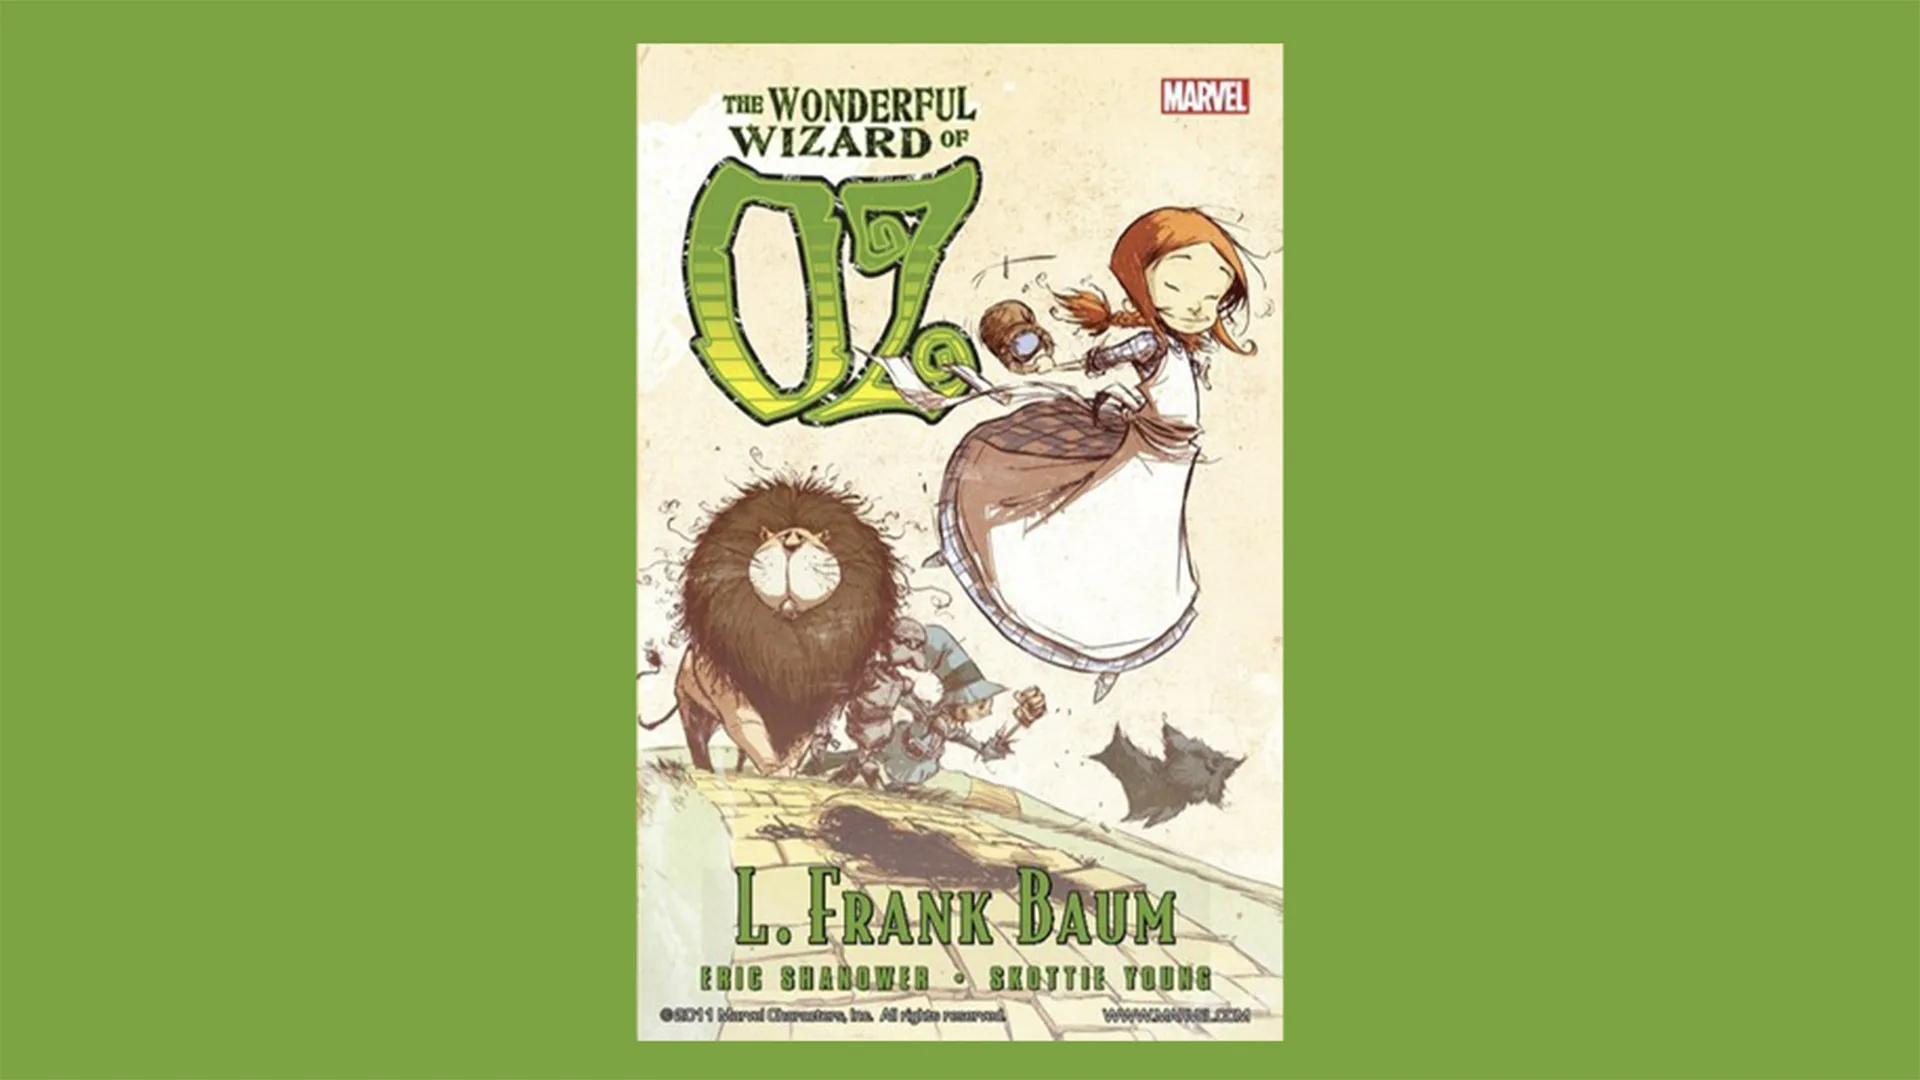 The graphic novel book cover of The Wonderful Wizard of Oz